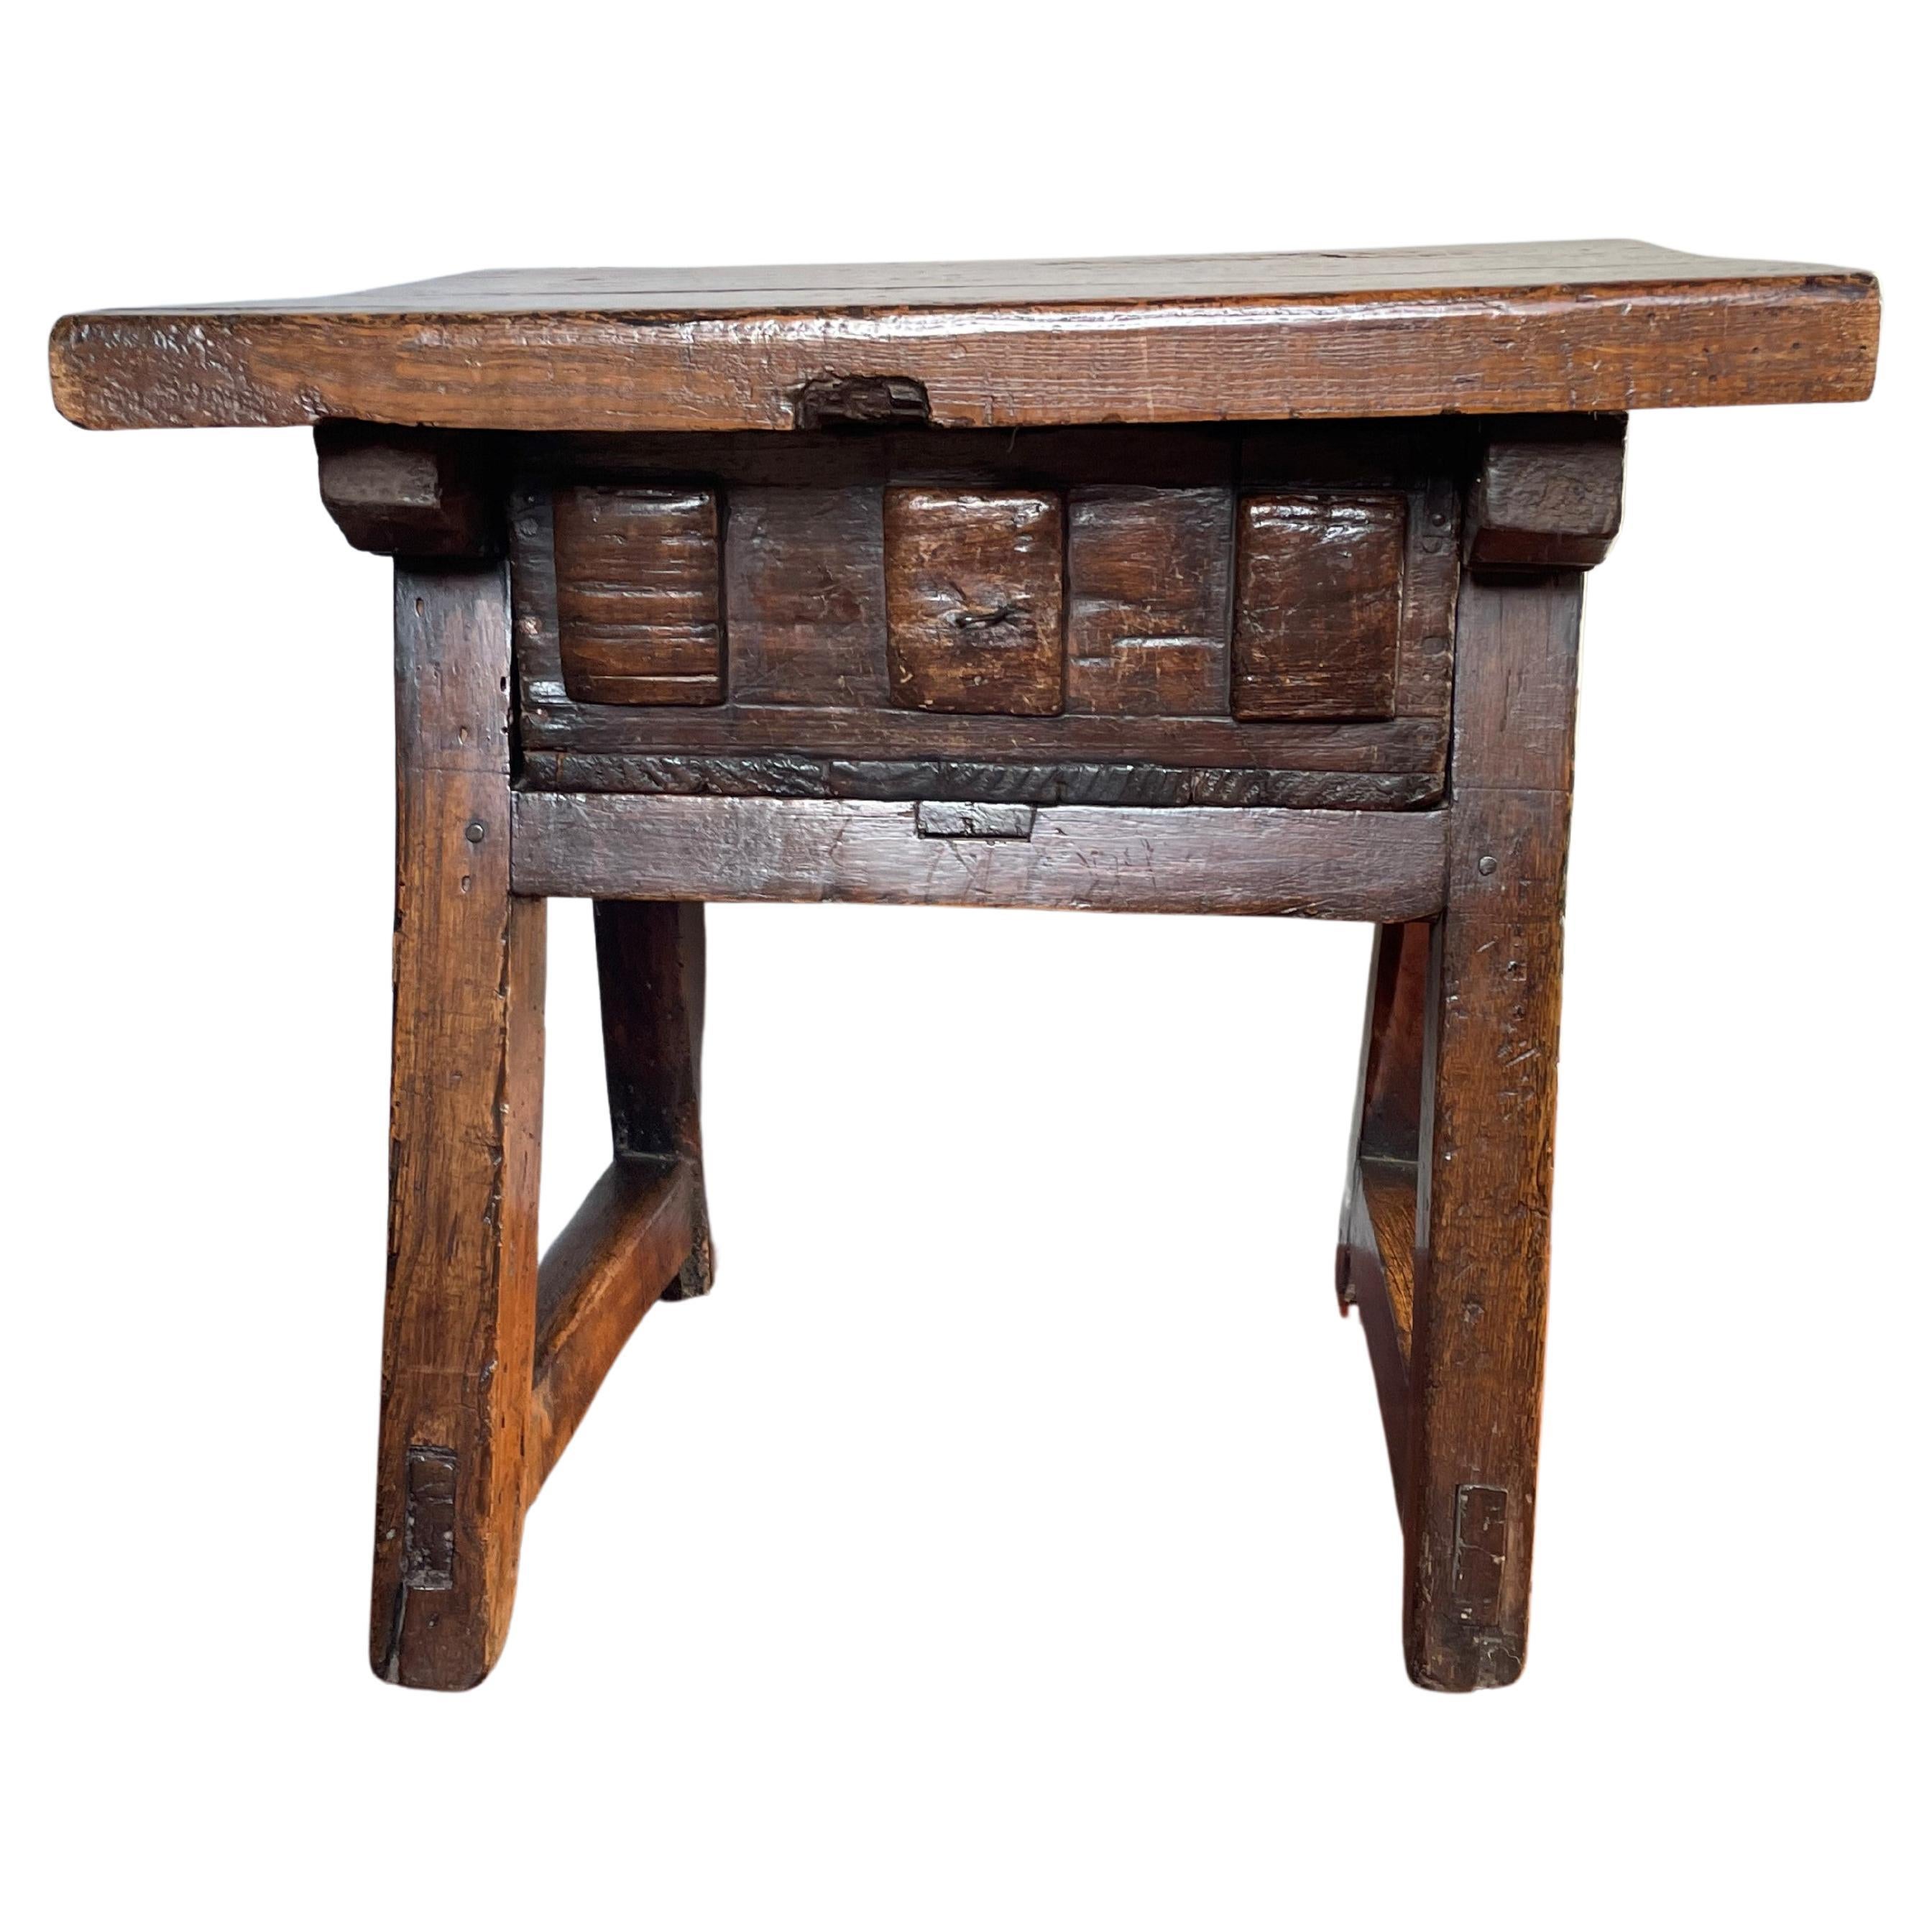 Antique & Rustic Early 1800s Wooden Spanish Countryside Pay Table with Drawer For Sale